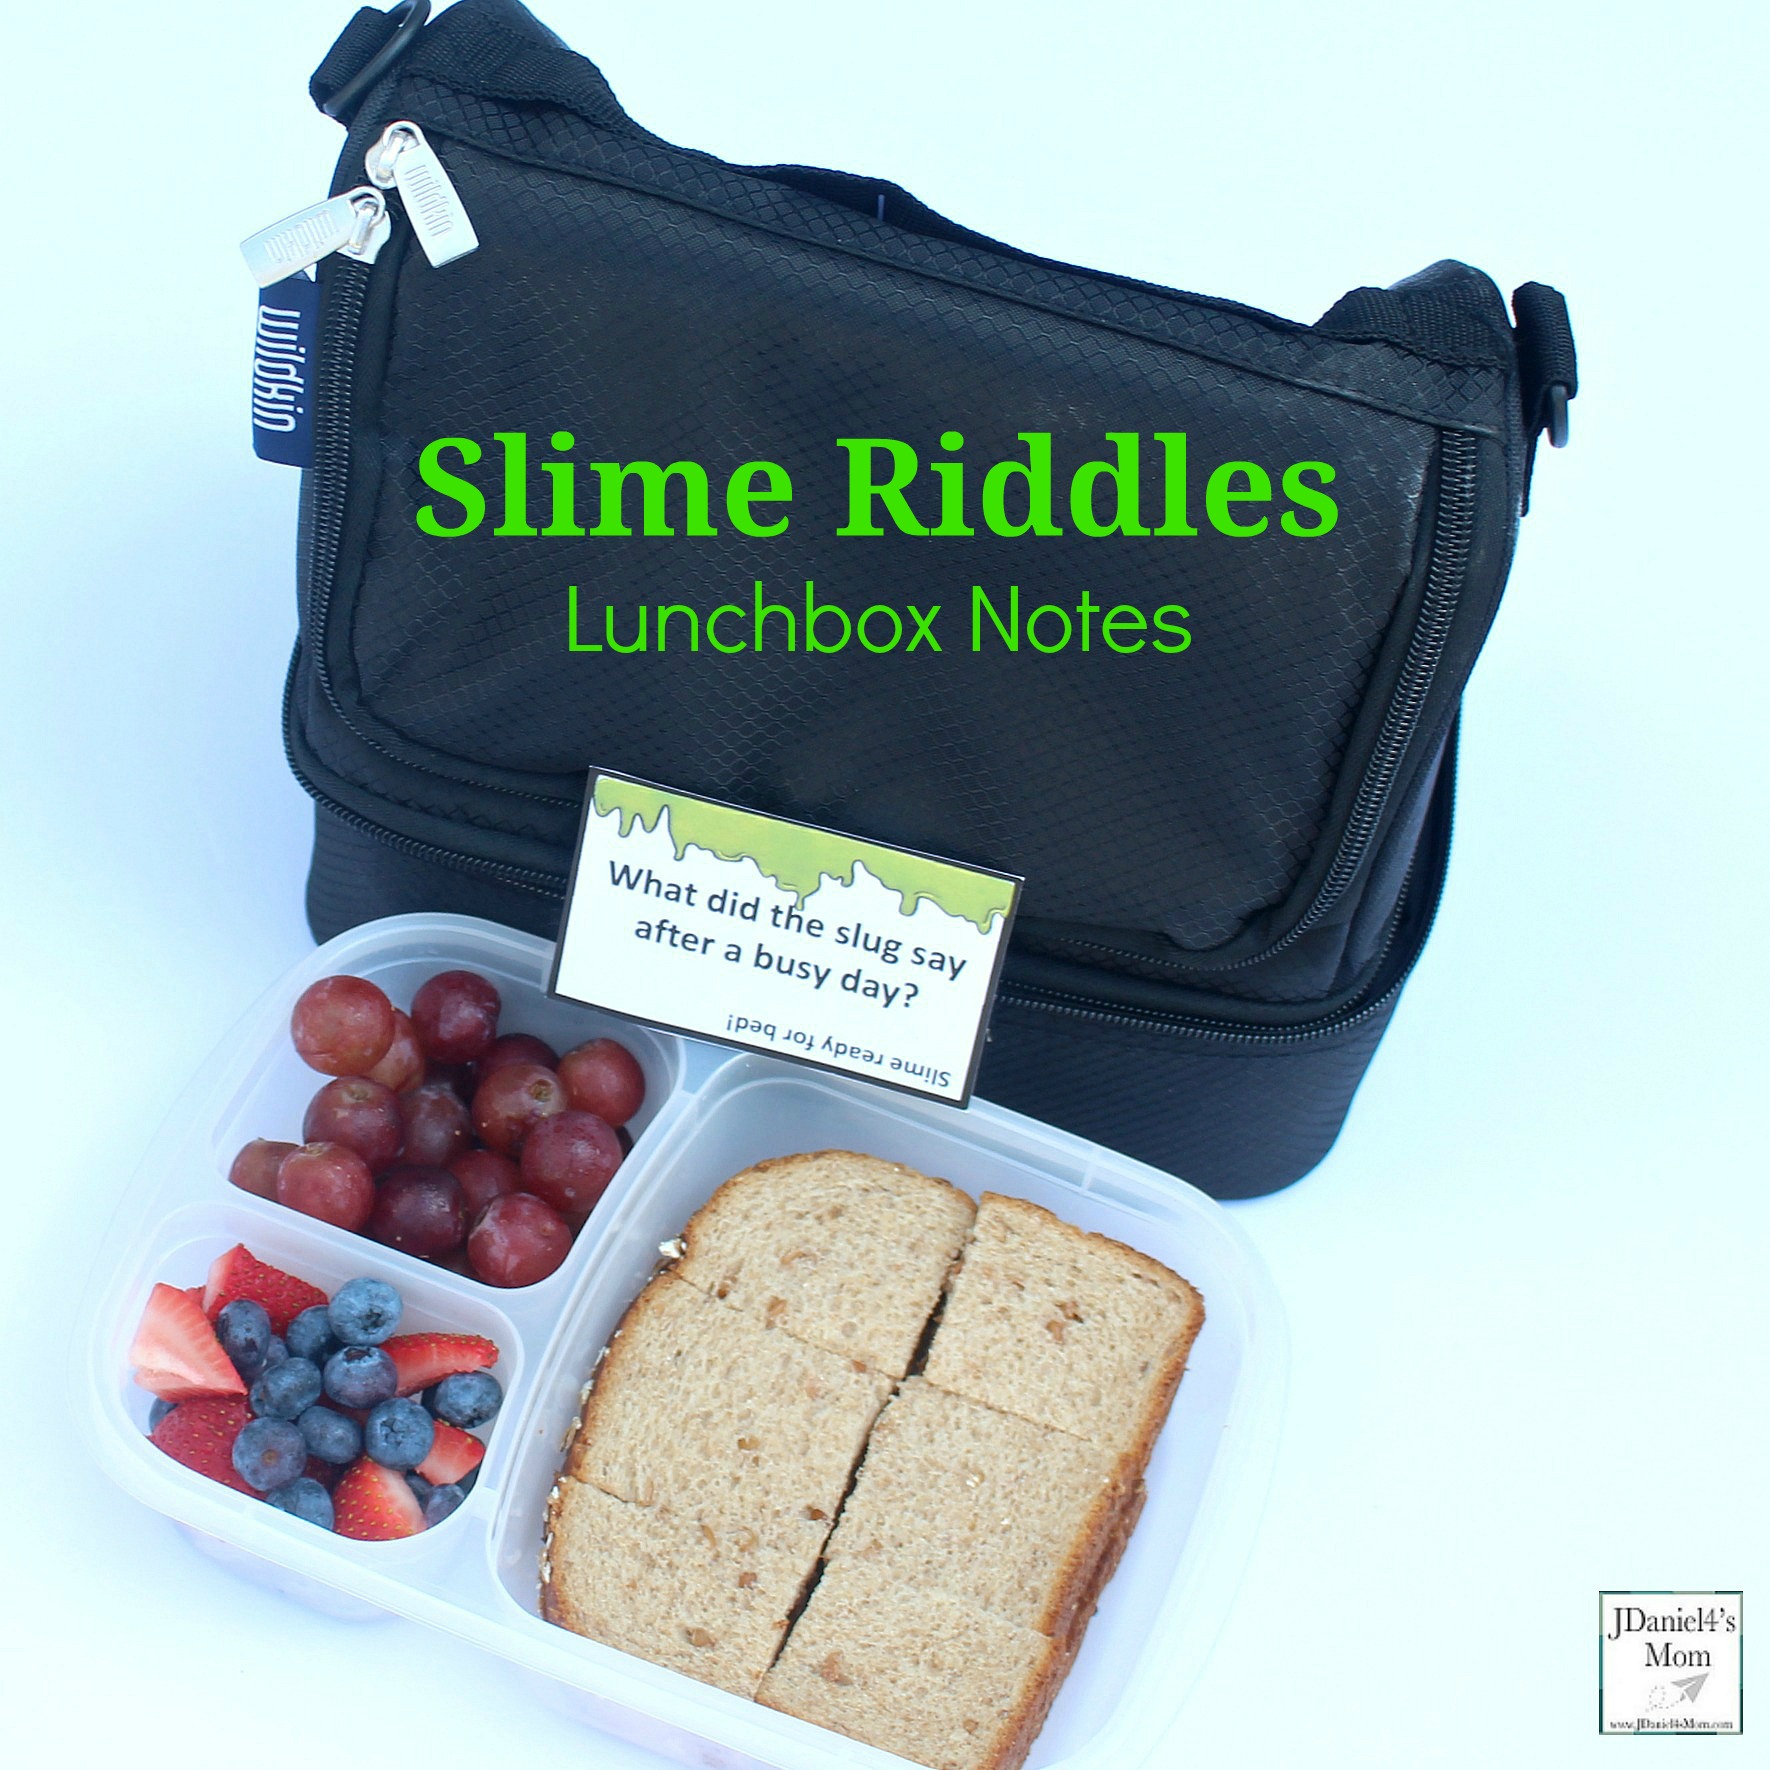 Lunchbox Notes- Slime Riddles